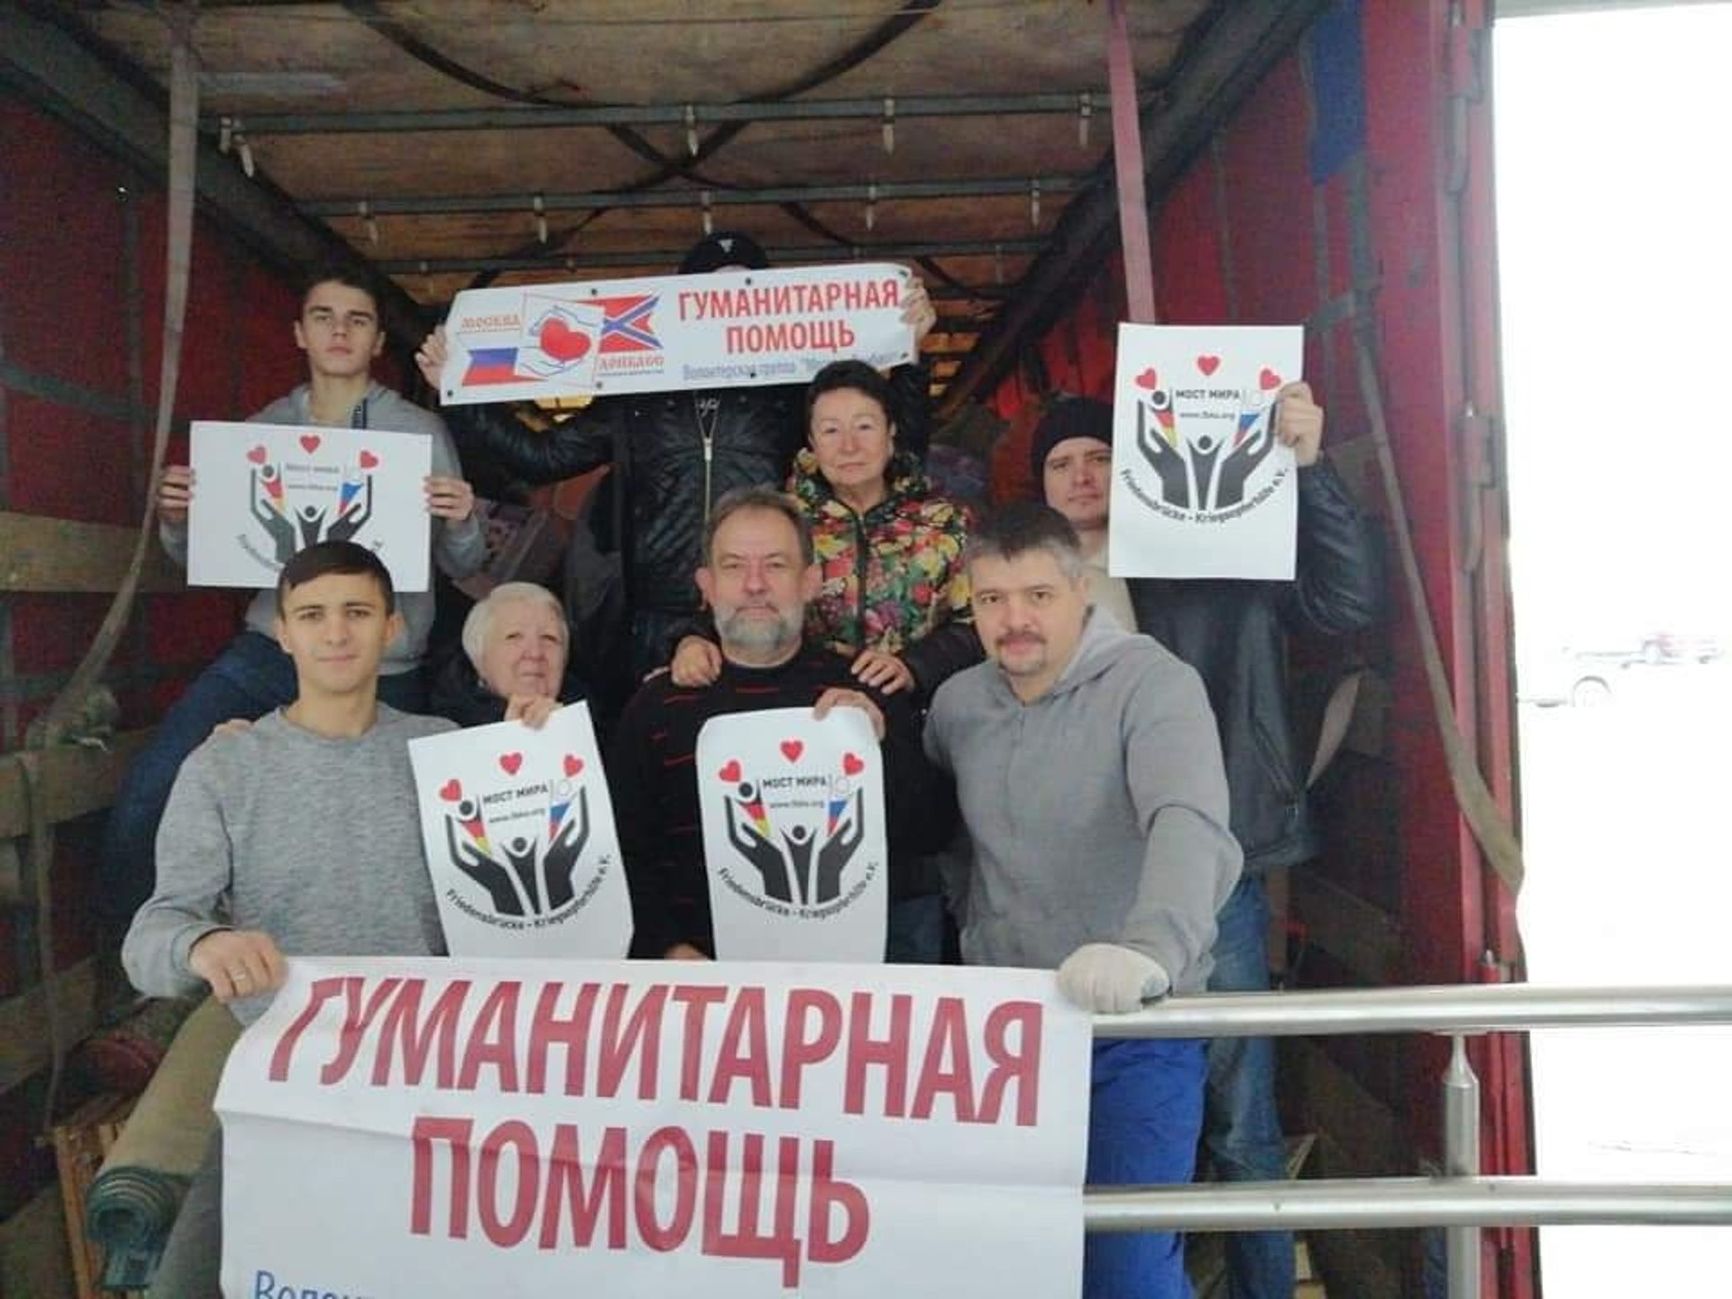 NCM members sending a truck to Donbass together with the Bridge of Peace Foundation